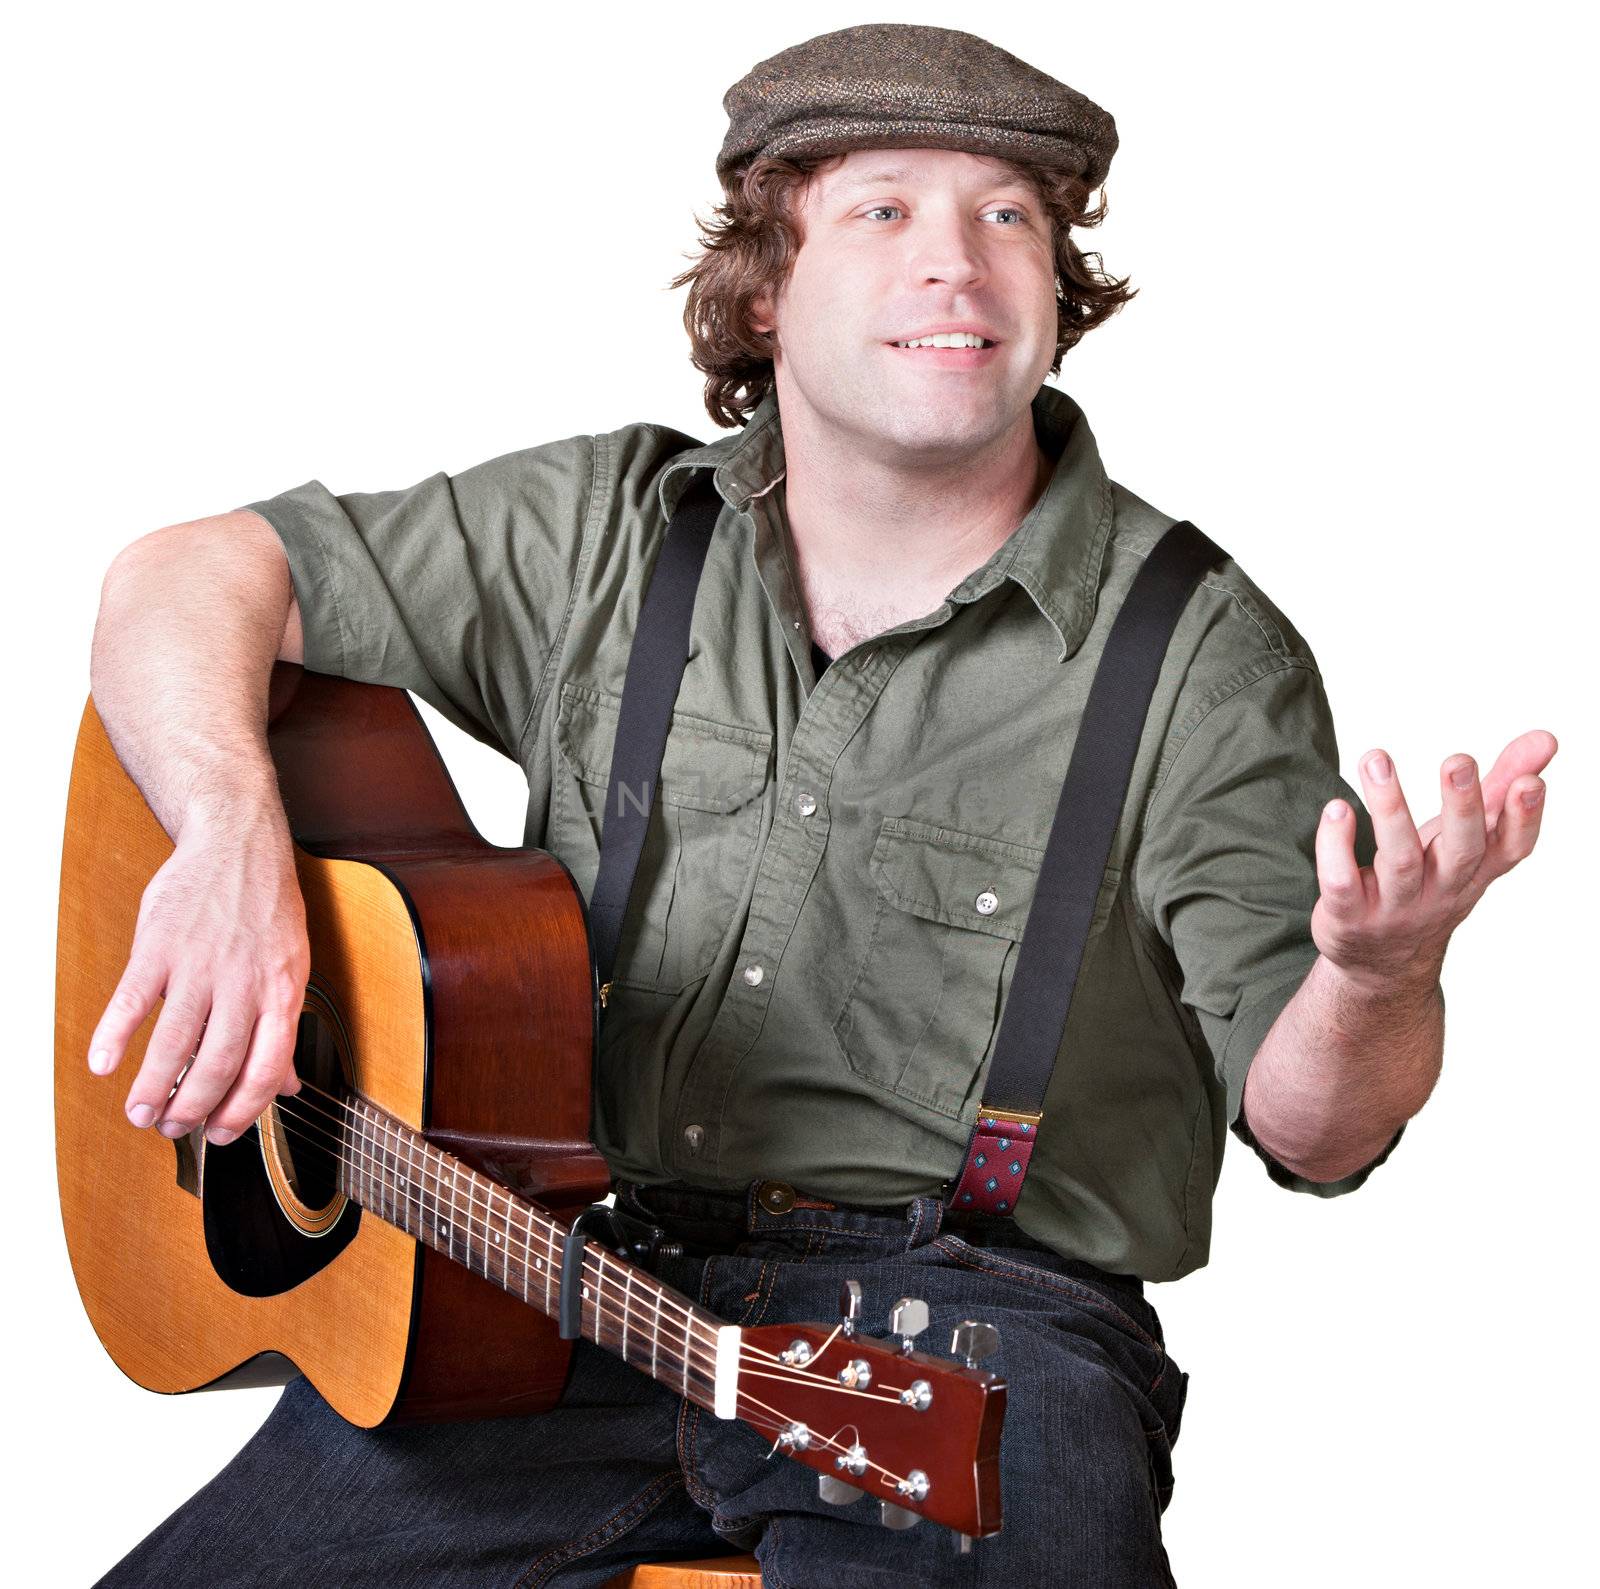 Cheerful guitar player with arm extended on isolated background